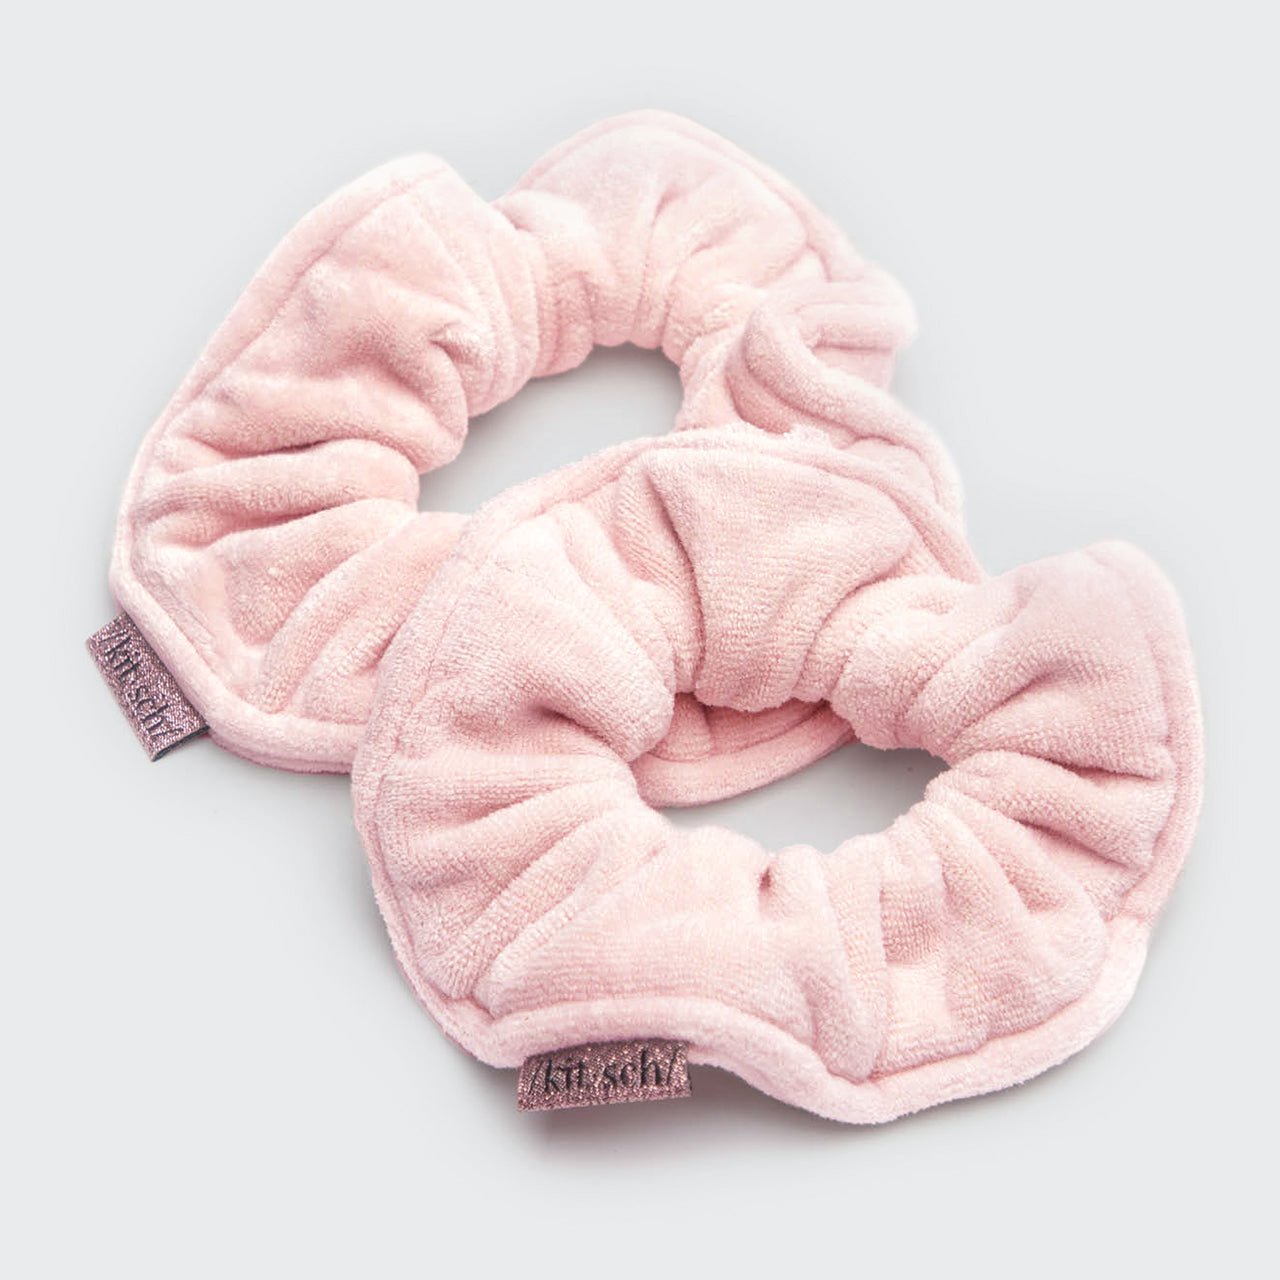 Chuangdi 2 Pieces Large Drying Scrunchies Microfiber Towel Hair Scrunchies  Thick Soft Scrunchies and 2 Pieces Microfiber Bowtie Headbands Makeup